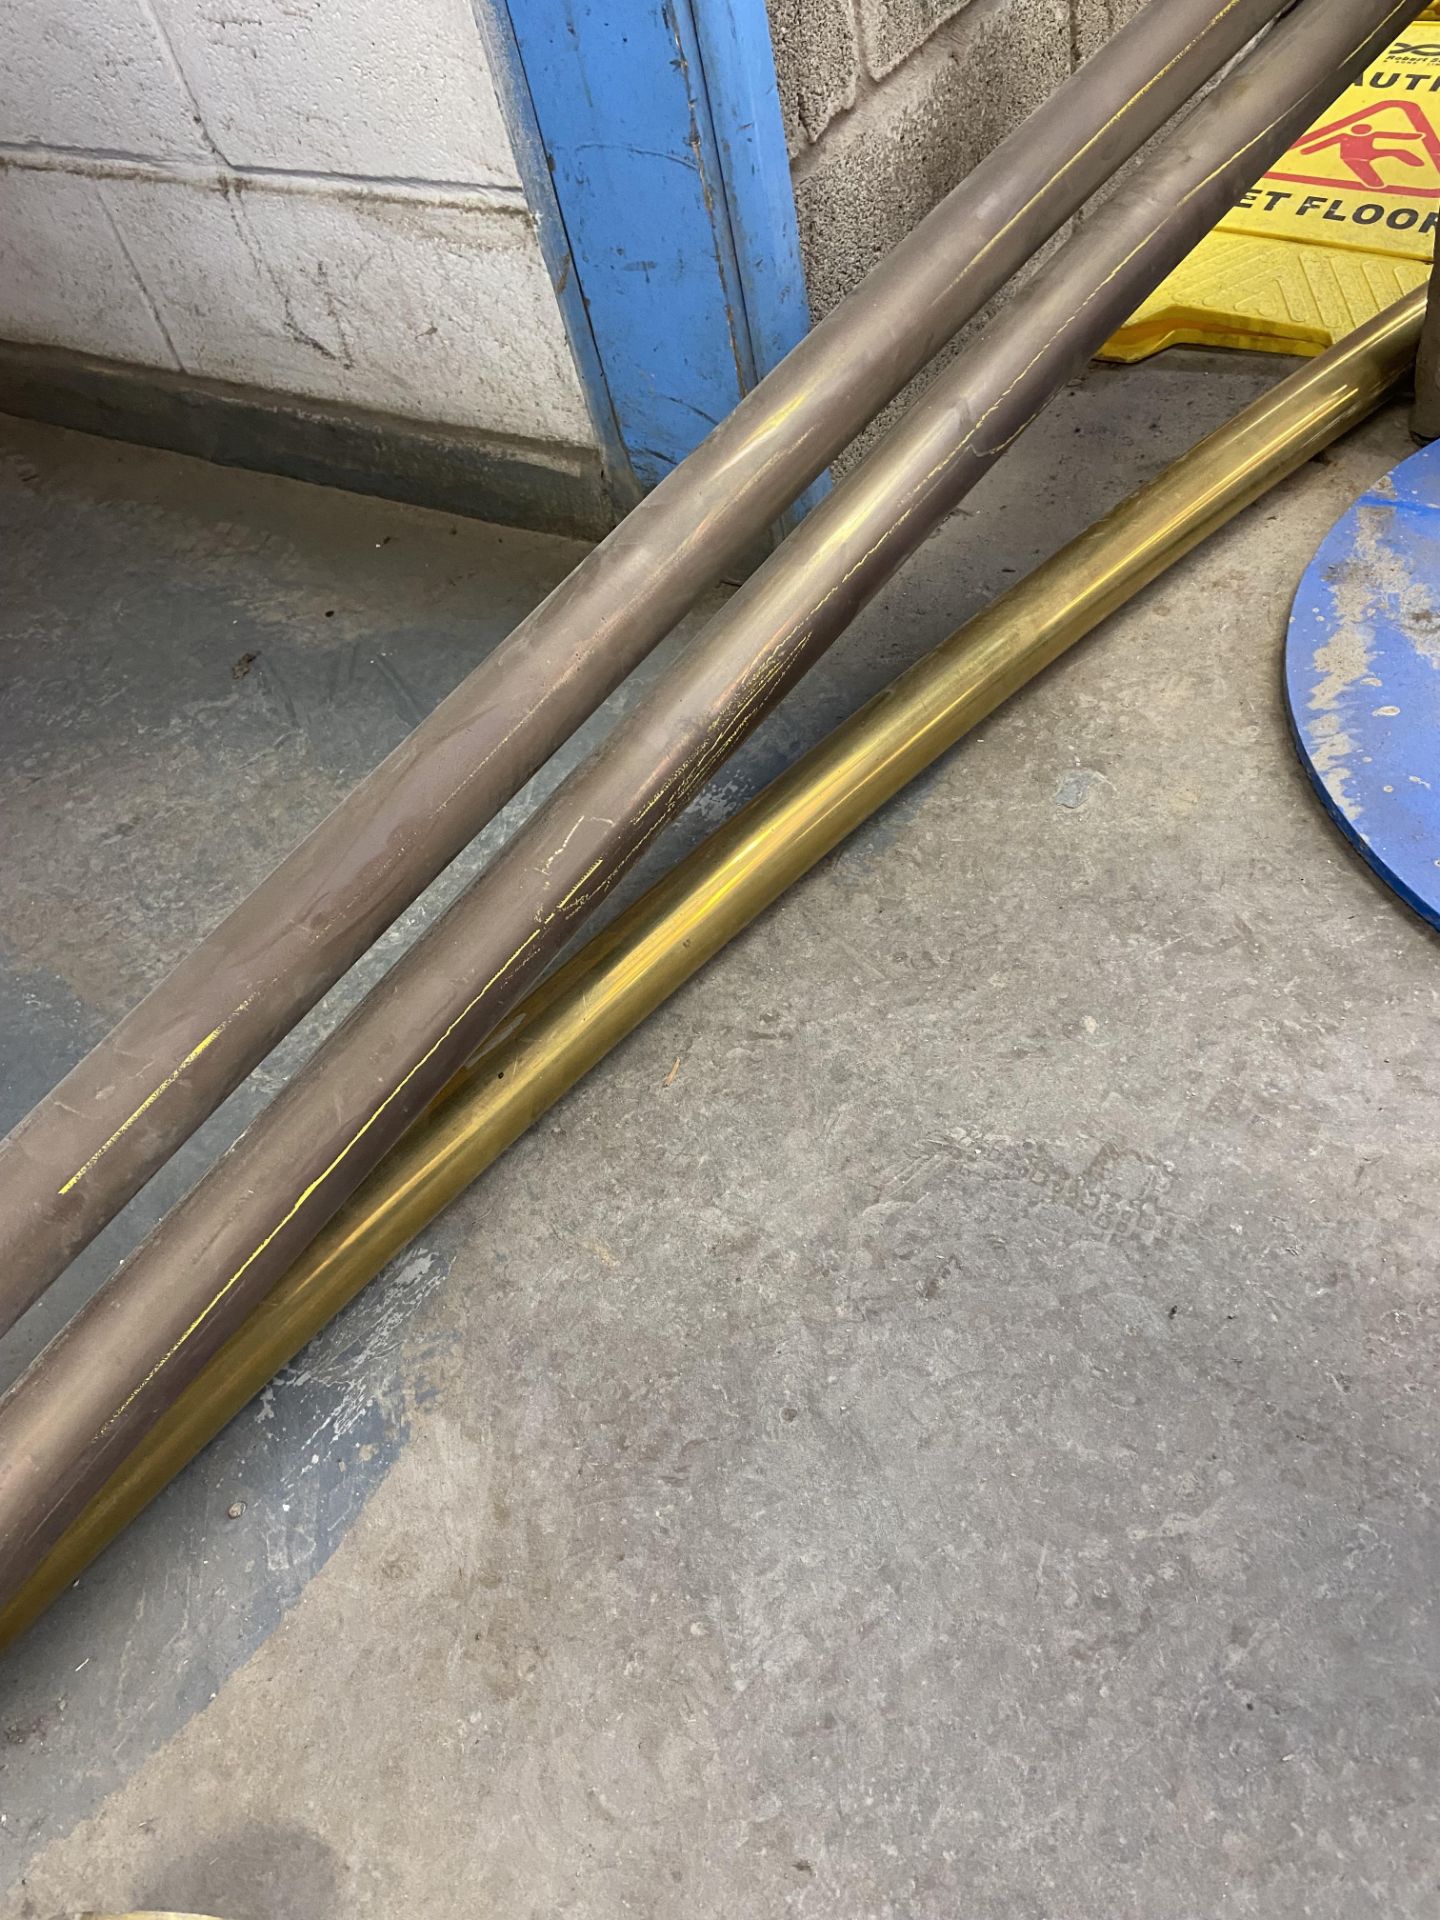 Assorted Brass Handrails - Image 2 of 3